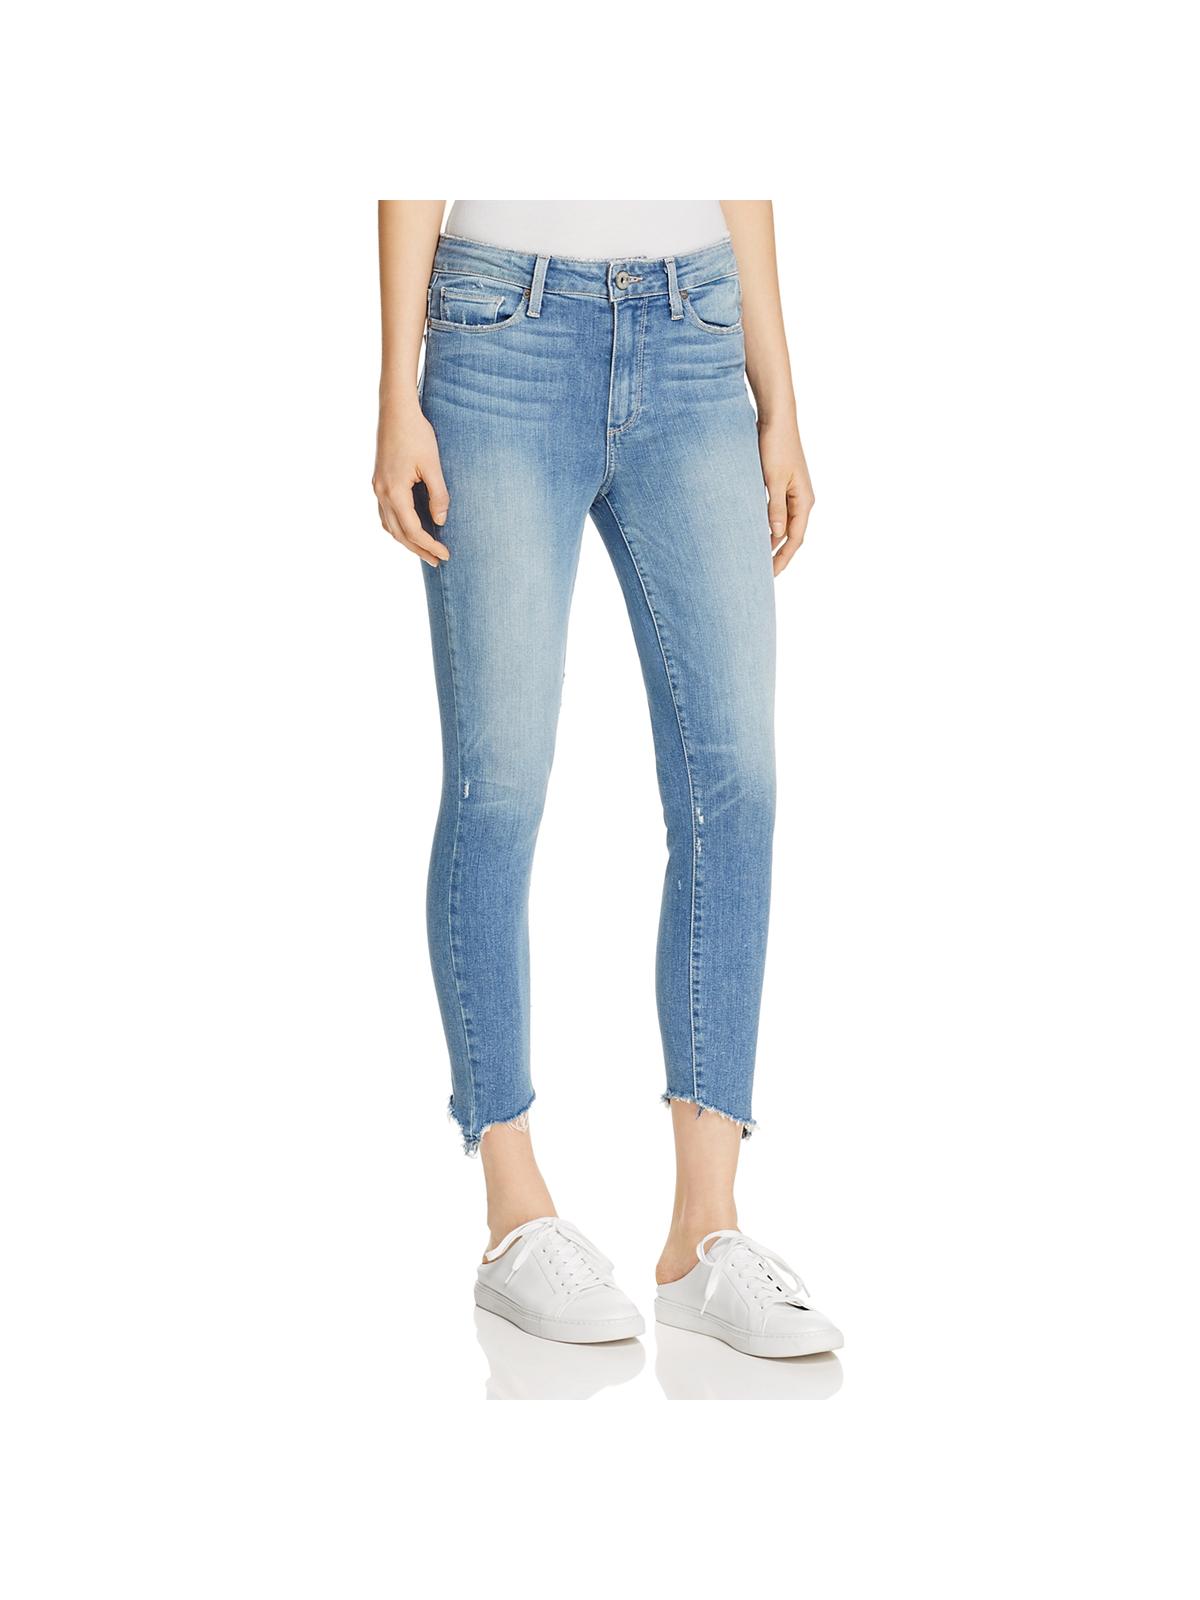 Paige Womens Hoxton Classic Rise Denim Cropped Jeans - image 1 of 2